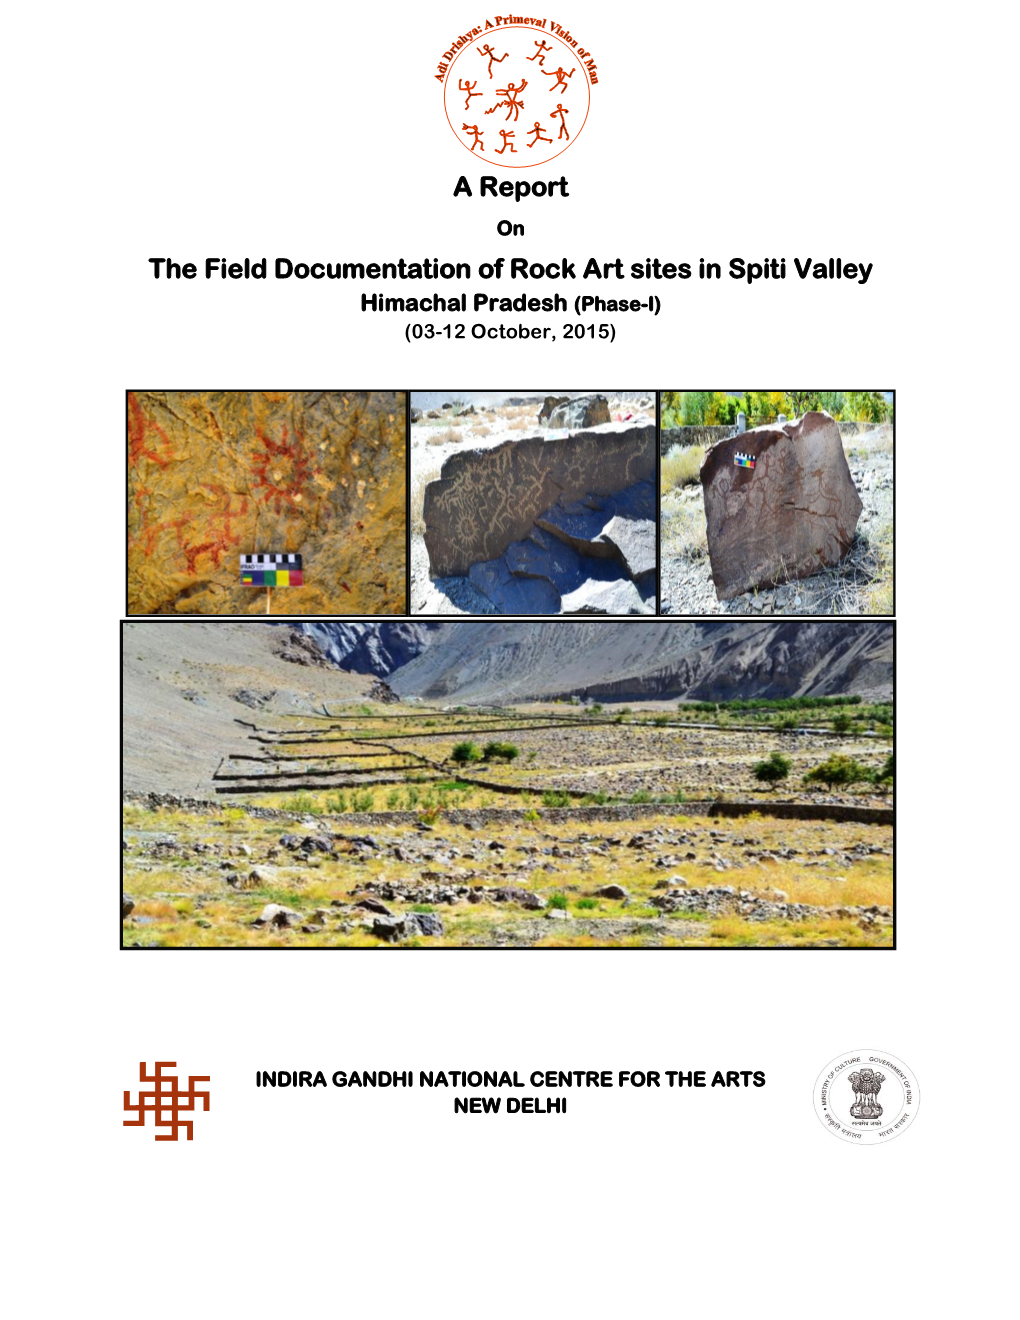 A Report the Field Documentation of Rock Art Sites in Spiti Valley